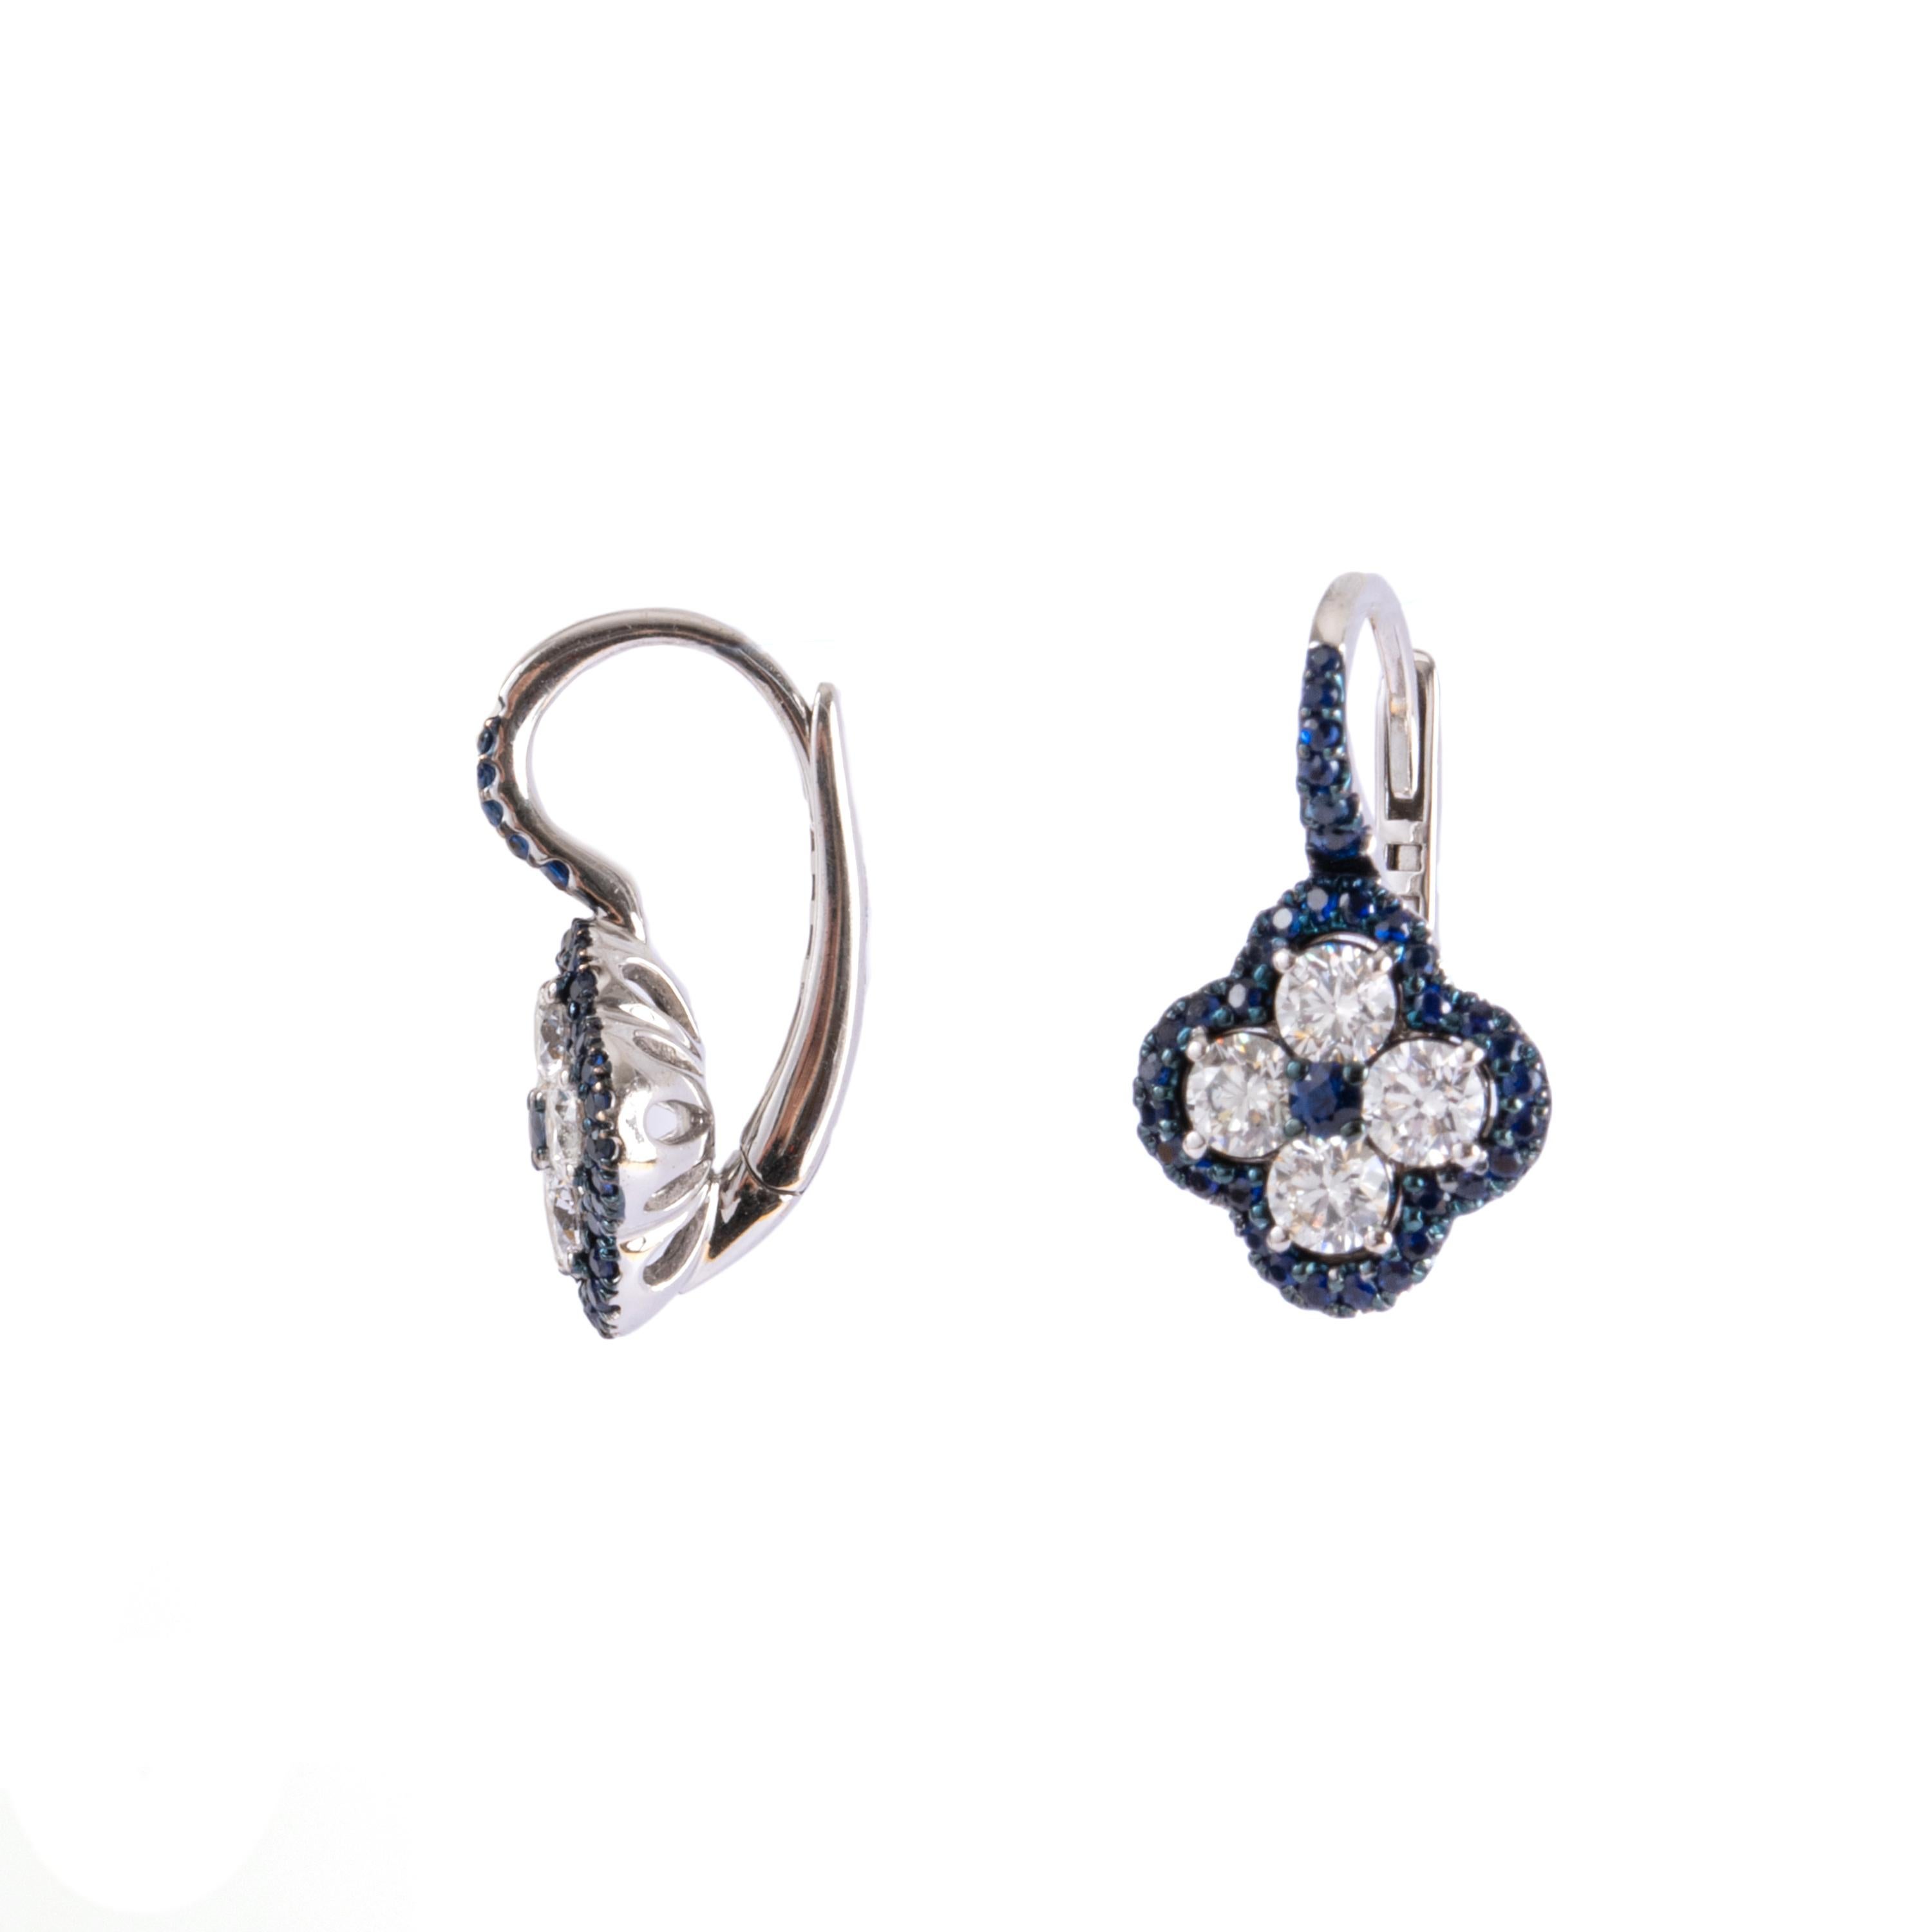 These lovely earrings made from Crivelli are a nice four-leaf clover earrings. They feature 1.31 carat white brilliant cut Diamonds and 0.63 carat Sapphire.

These earrings are simple enough or daytime wear and beautiful enough for a special event. 